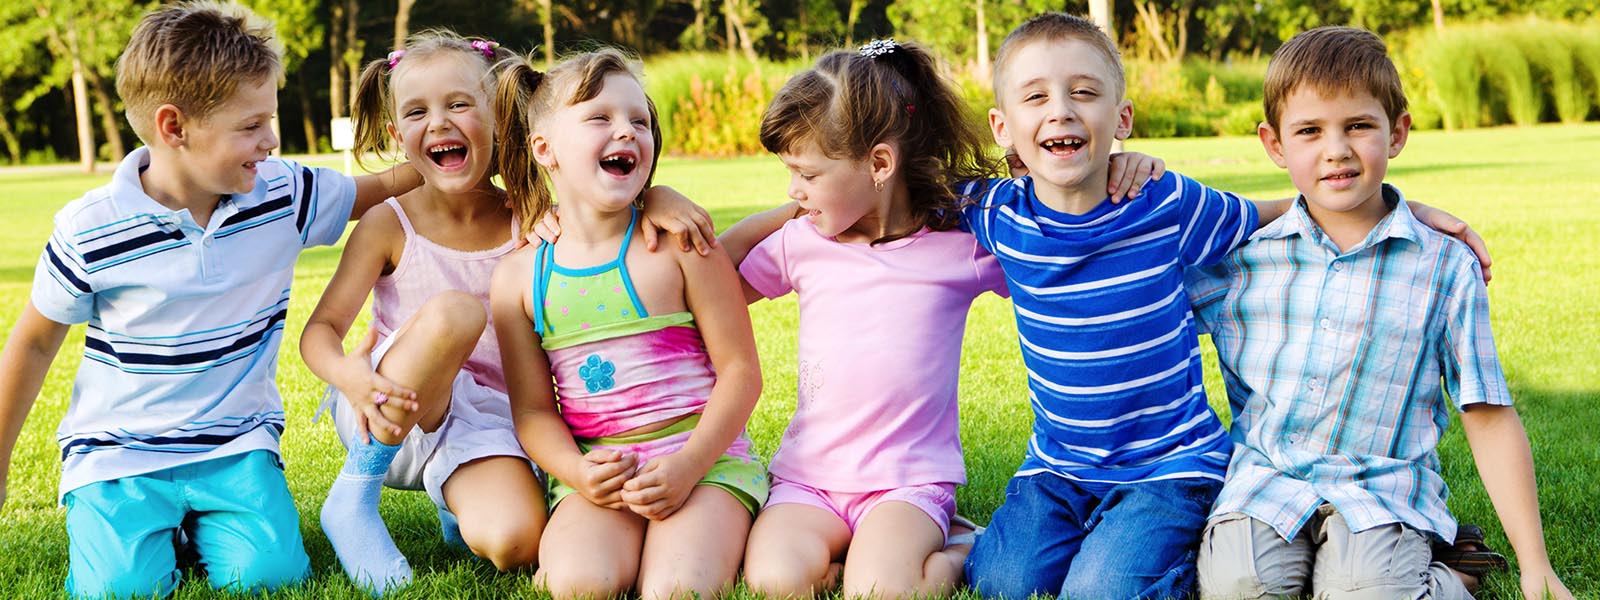 Children sitting on grass and smiling